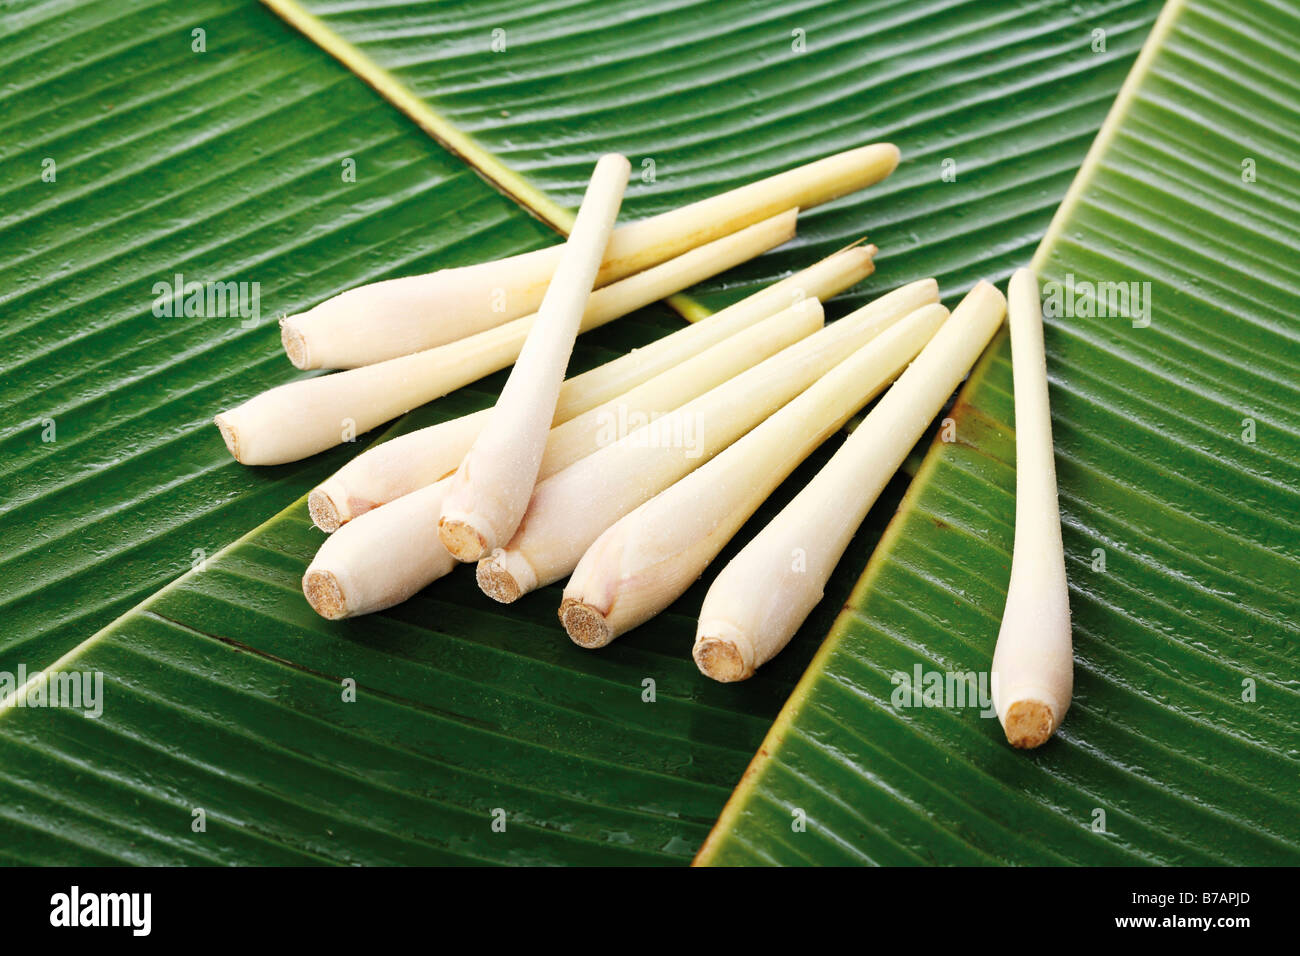 Lemon Grass also Oil Grass (Cymbopogon citratus), on bed of banana leaves Stock Photo